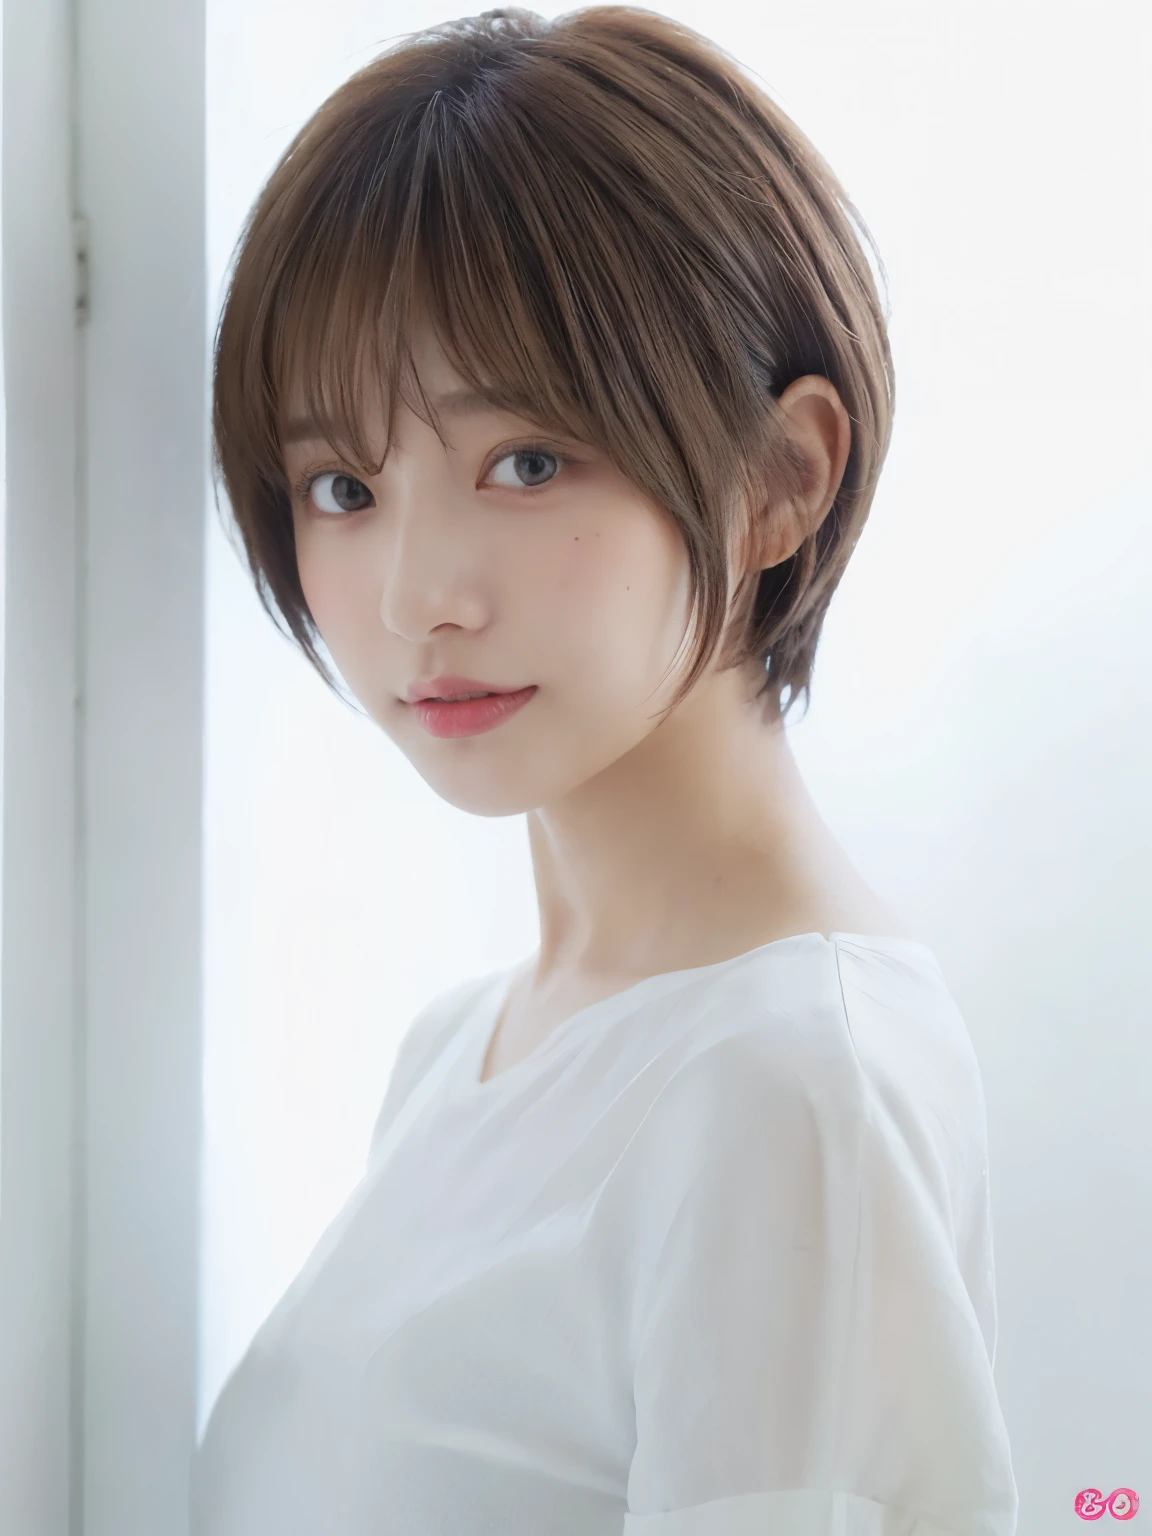 Light grey short sleeve dress、Tabletop、(White wall in the background)、In front of the white door、((highest quality、8k、masterpiece:1.3))、Ultra-high resolution、(photoGenuineistic:1.4)、RAW Photos、30-year-old woman、Japanese,(face)、Genuine、Photographed in natural light、Highly detailed face and skin texture、Highly detailed lips、The correct state of the human body、short hair、Shortcuts、Brown Hair、short hair、Mr.々A pose、Natural color lip、Fluffy hair